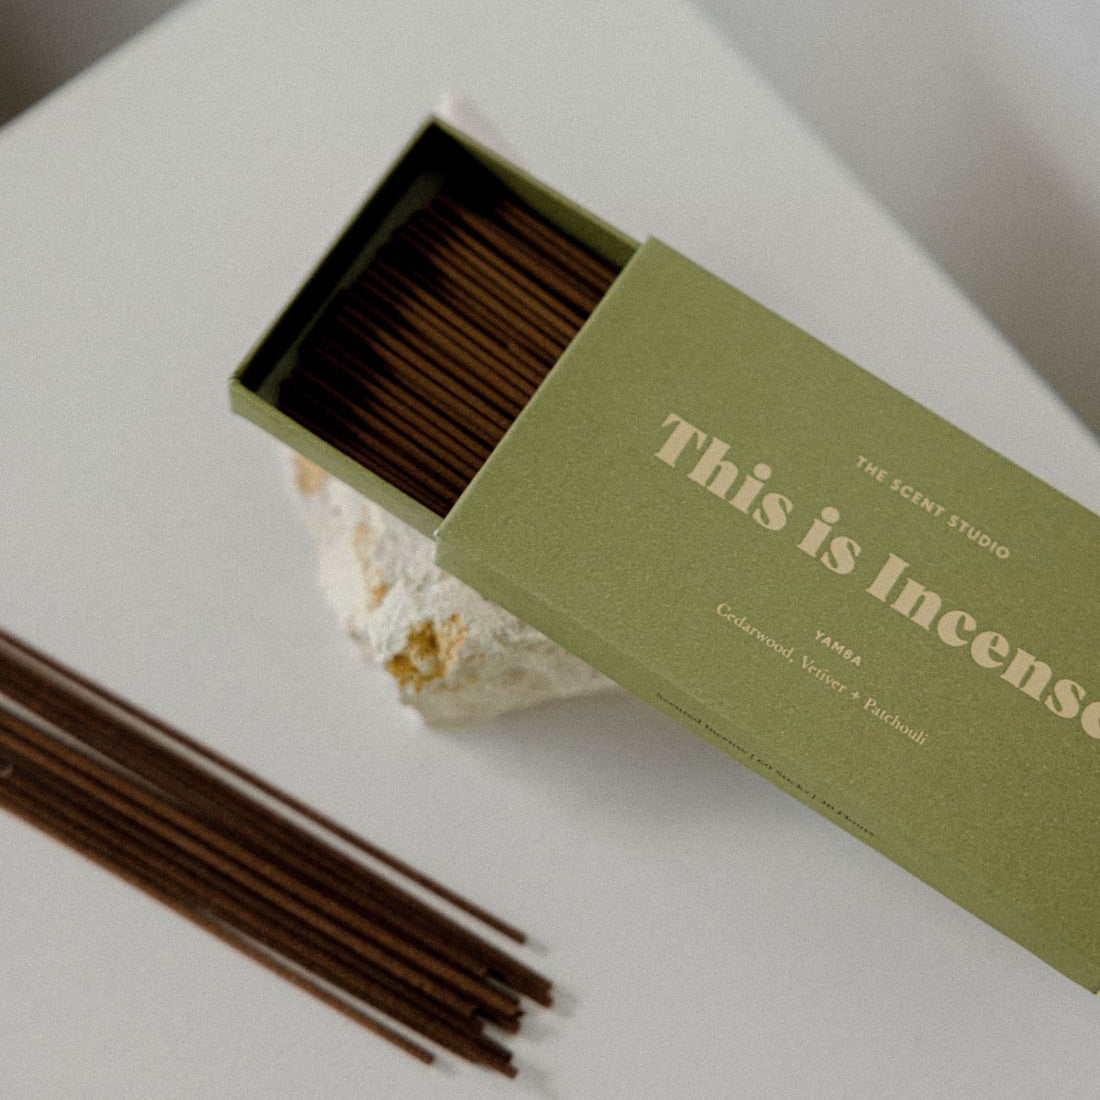 This is Incense by Gentle Habits - Yamba